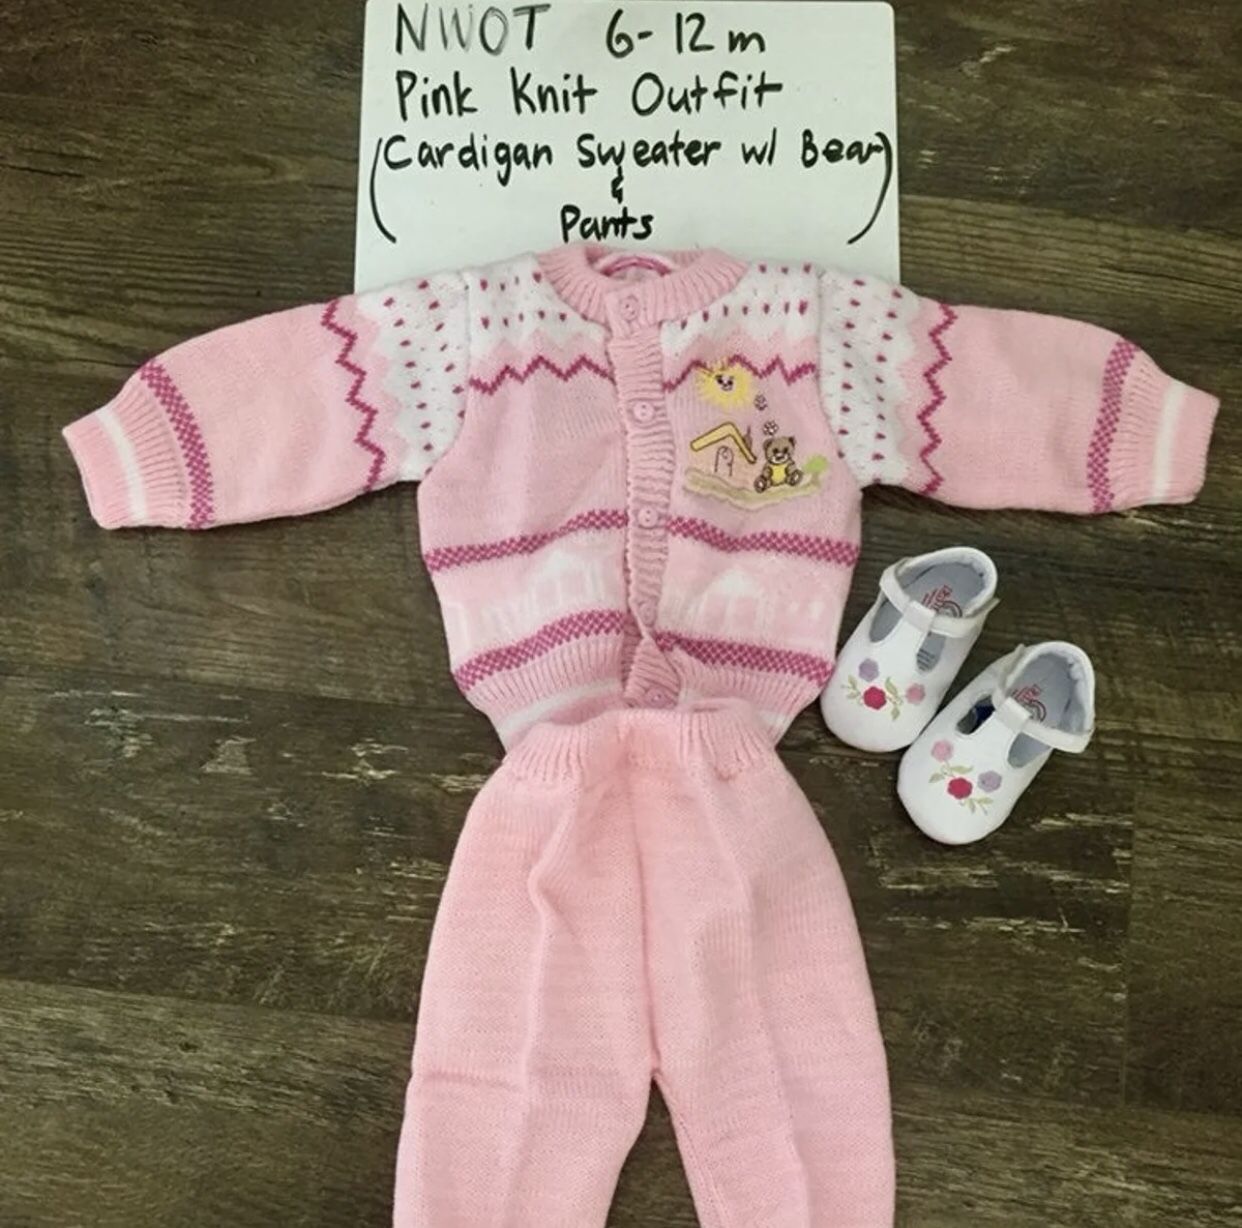 NWOT 6-12 m Knit Pink Sweater Pants Outfit & Coordinating Shoes